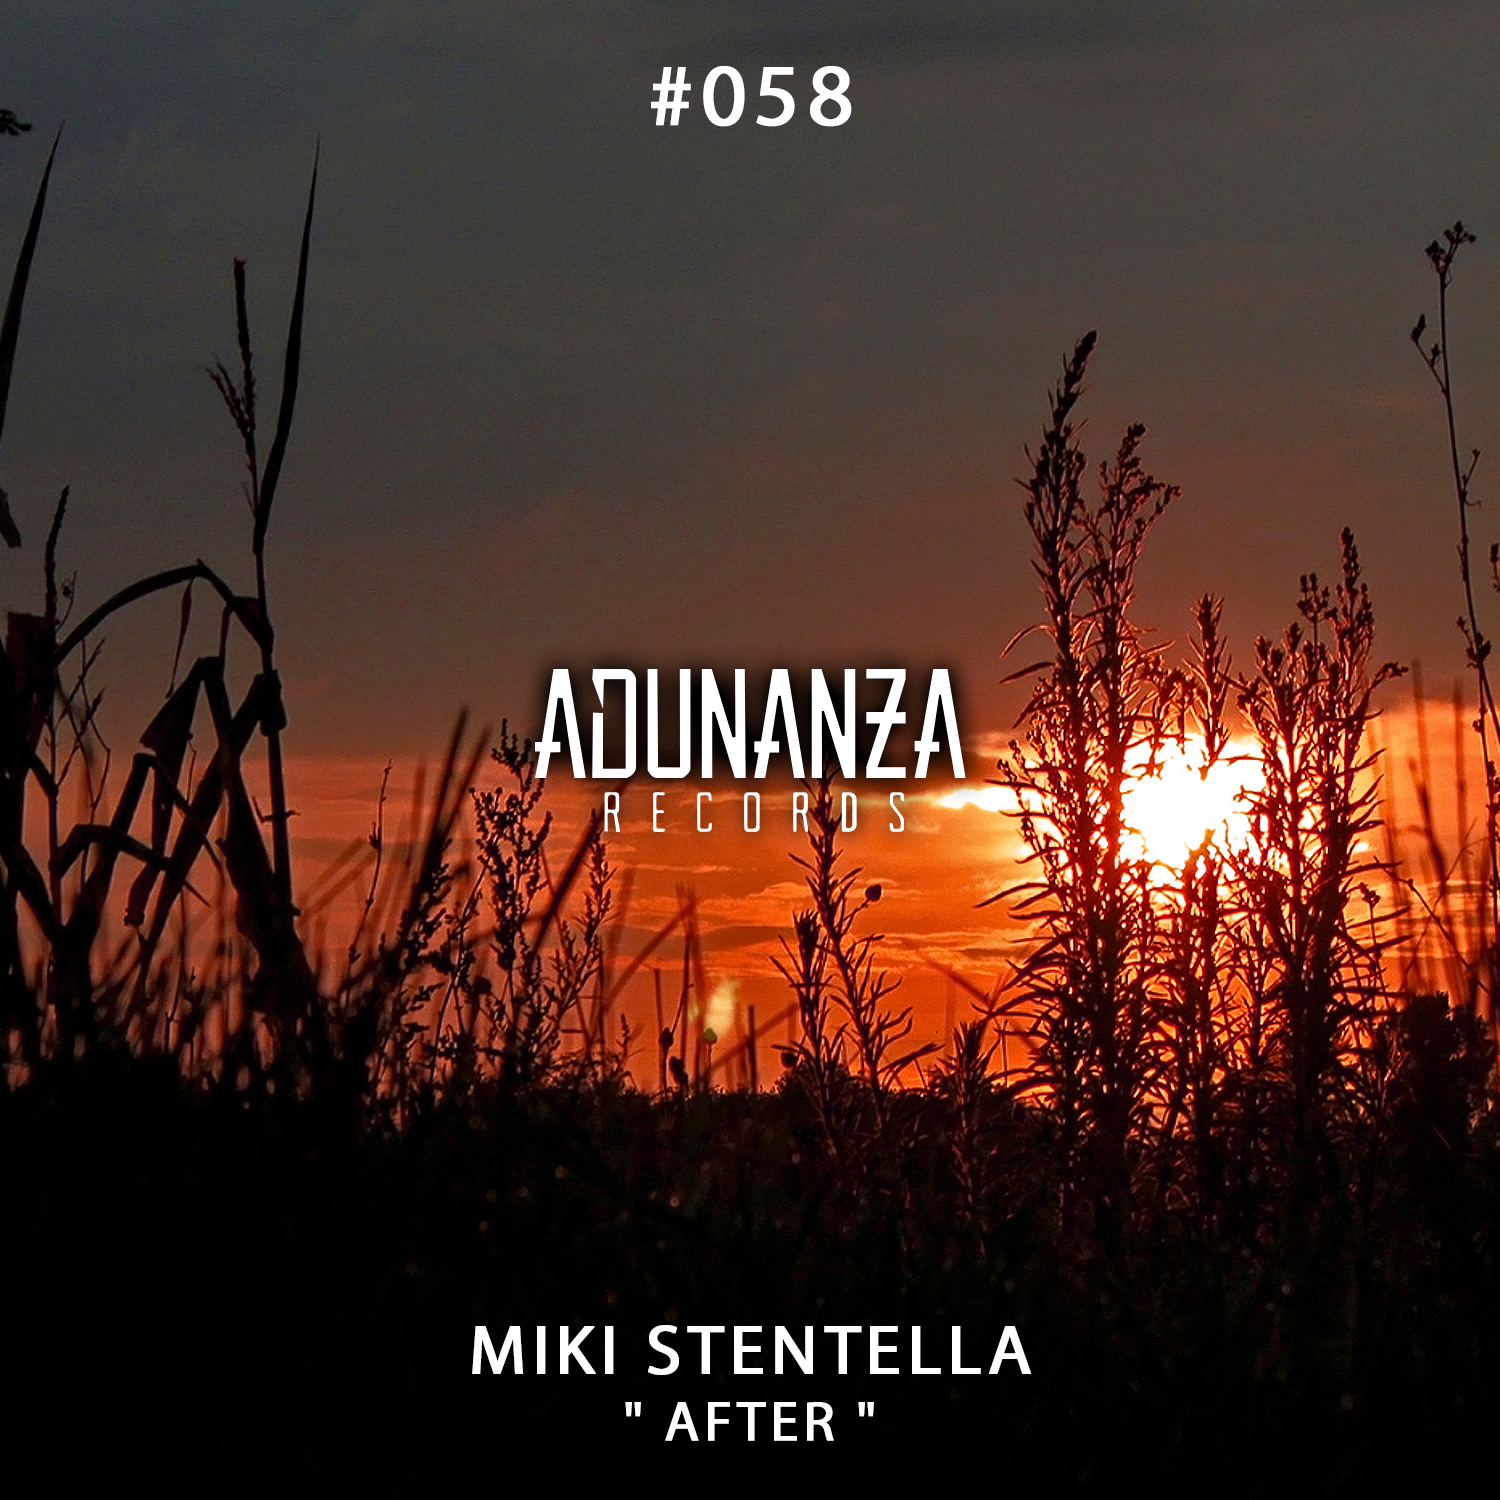 Italian producer and DJ Miki Stentella makes a triumphant return to Adunanza Records with"After"